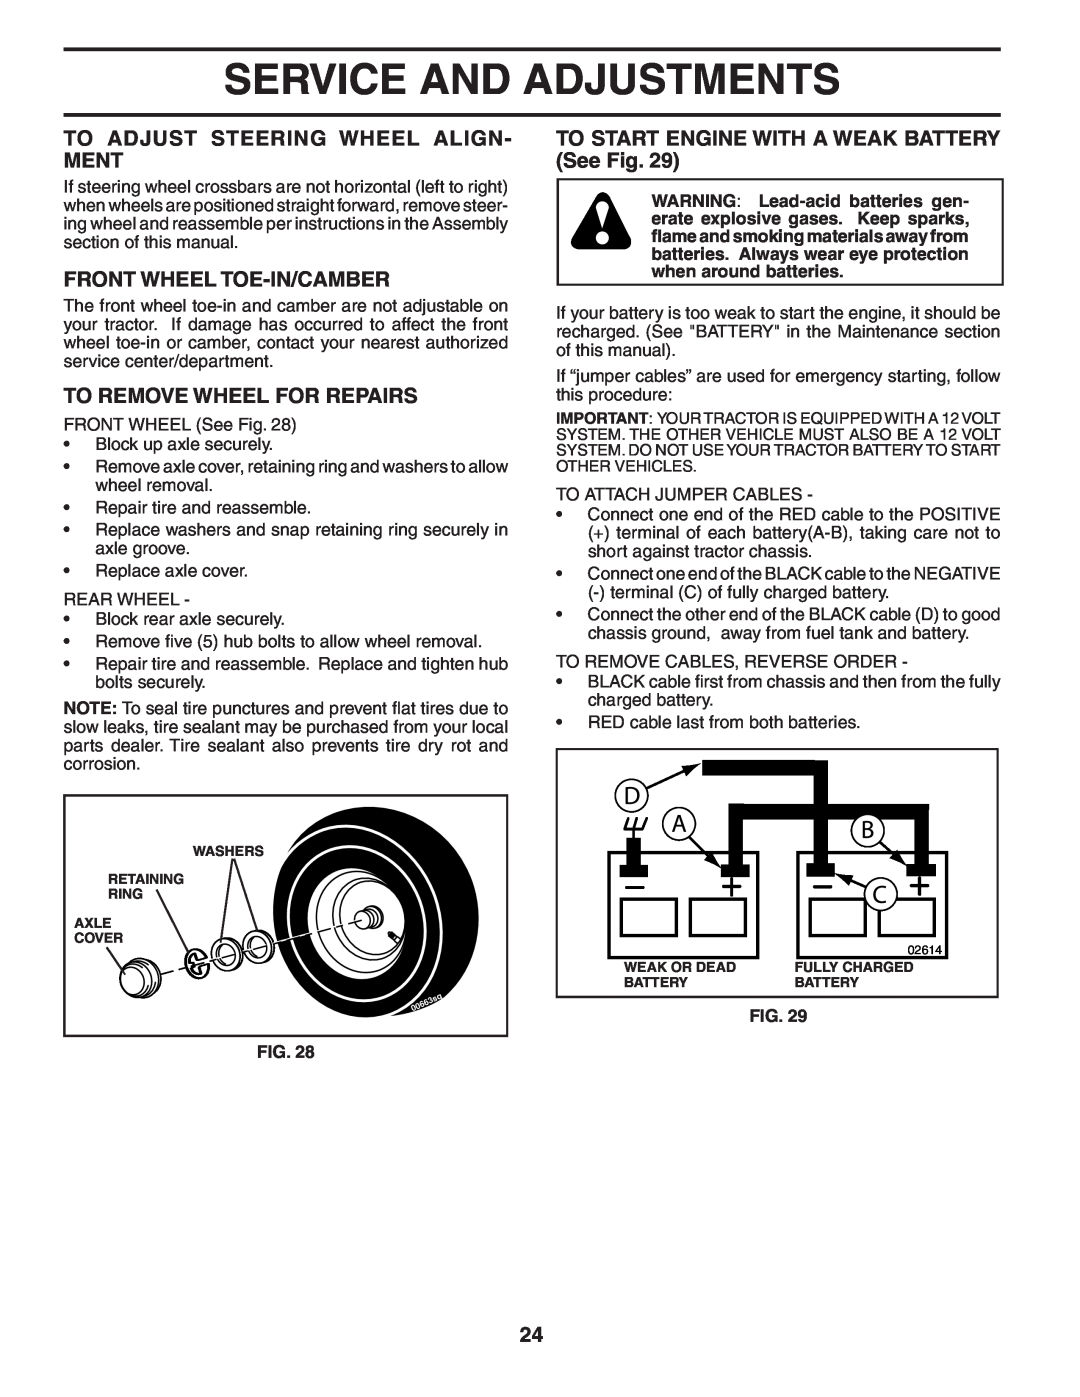 Poulan PKGTH2554 manual To Adjust Steering Wheel Align- Ment, Front Wheel Toe-In/Camber, To Remove Wheel For Repairs 